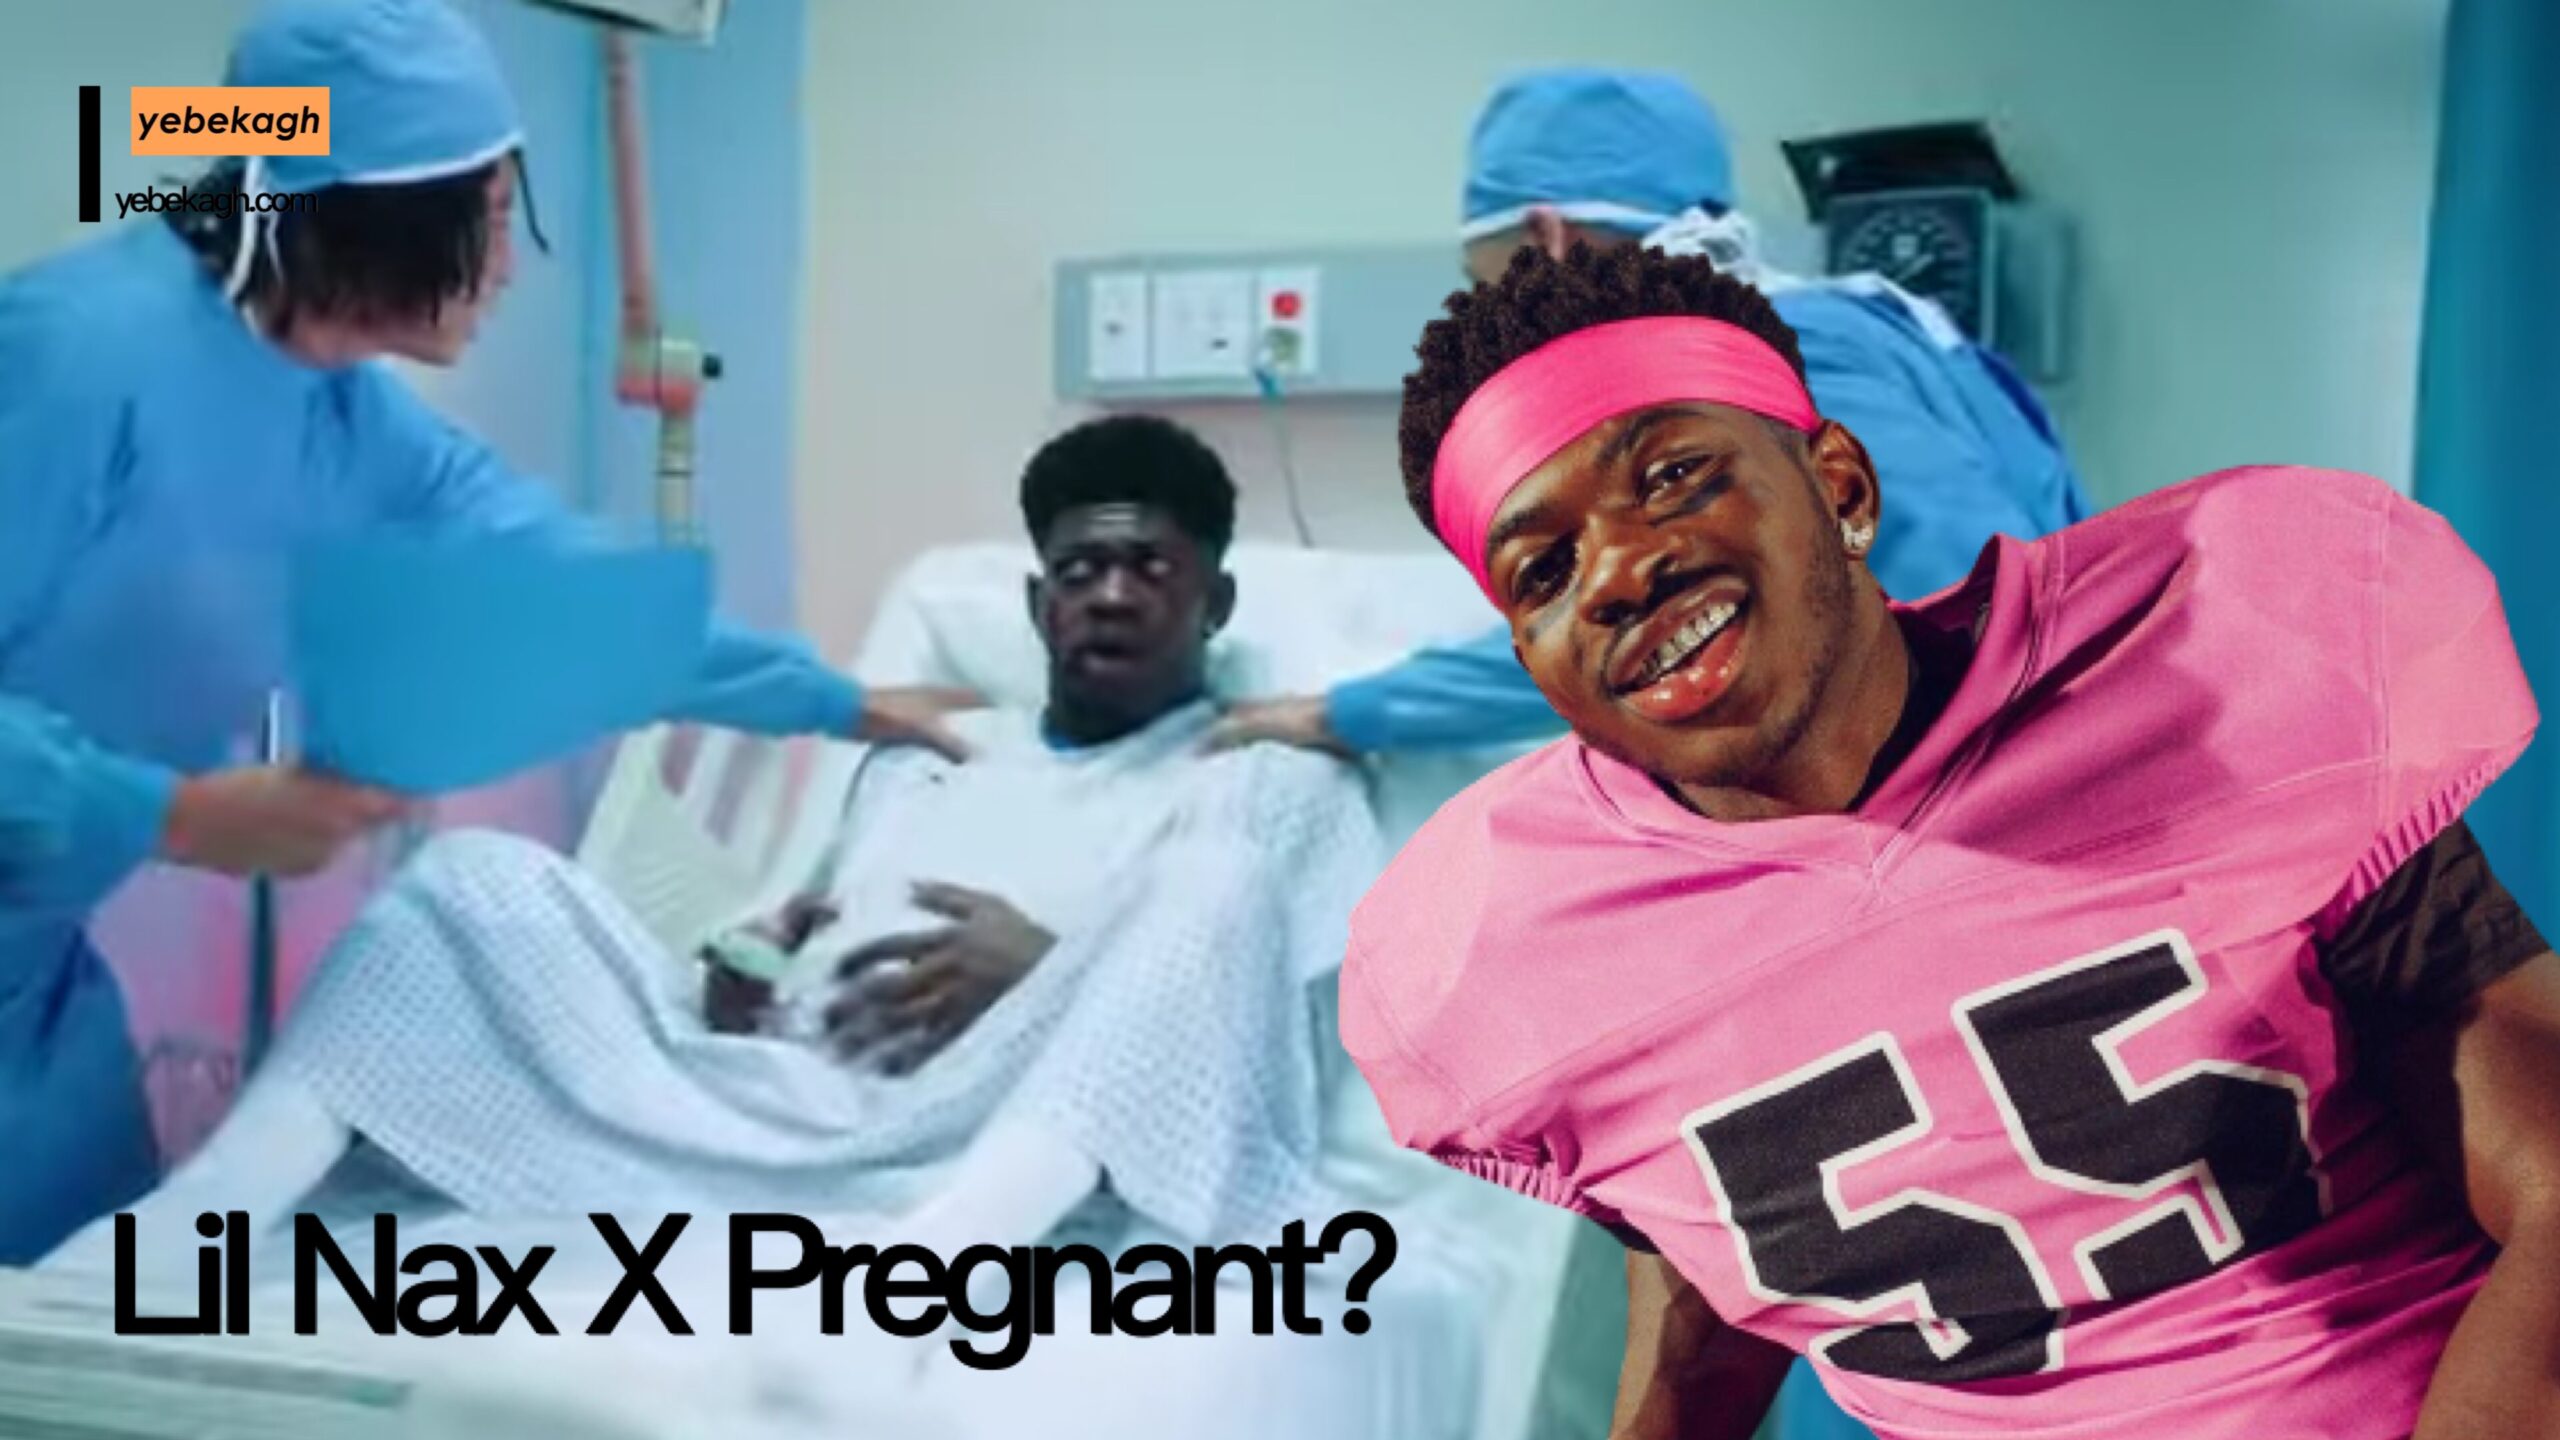 The truth about Lil Nas X’s pregnancy